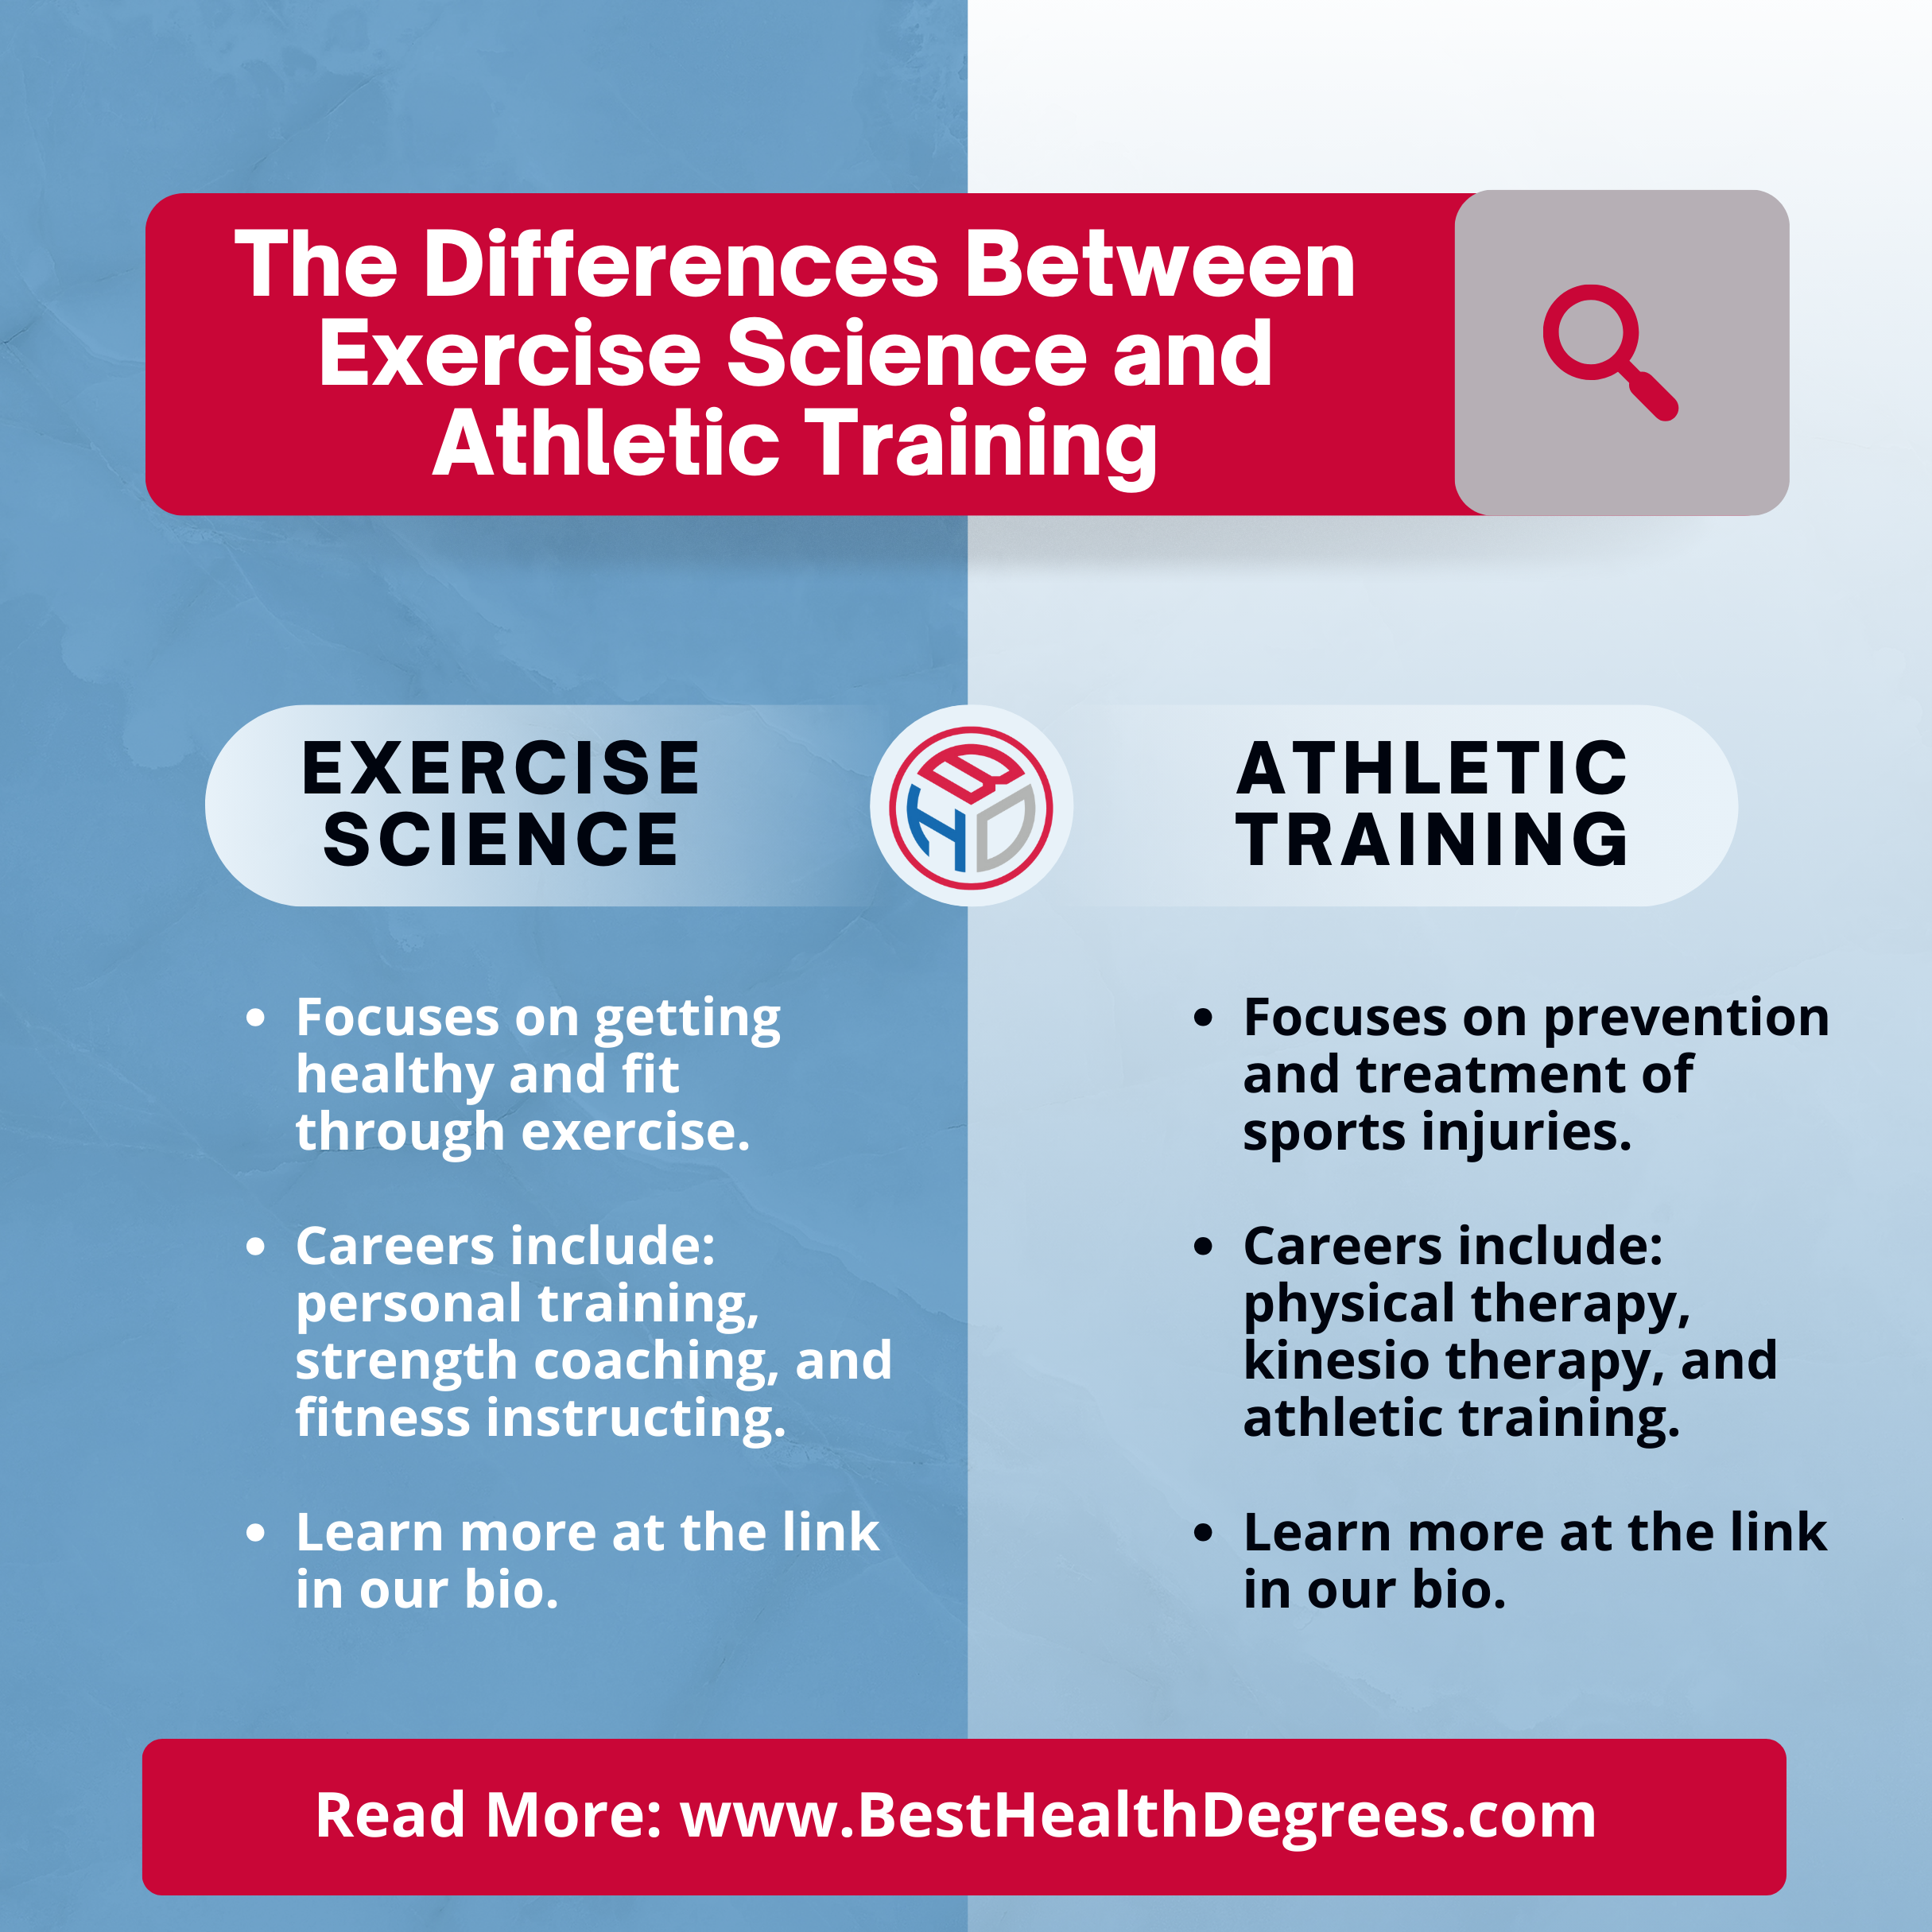 The Differences Between Exercise Science and Athletic Training